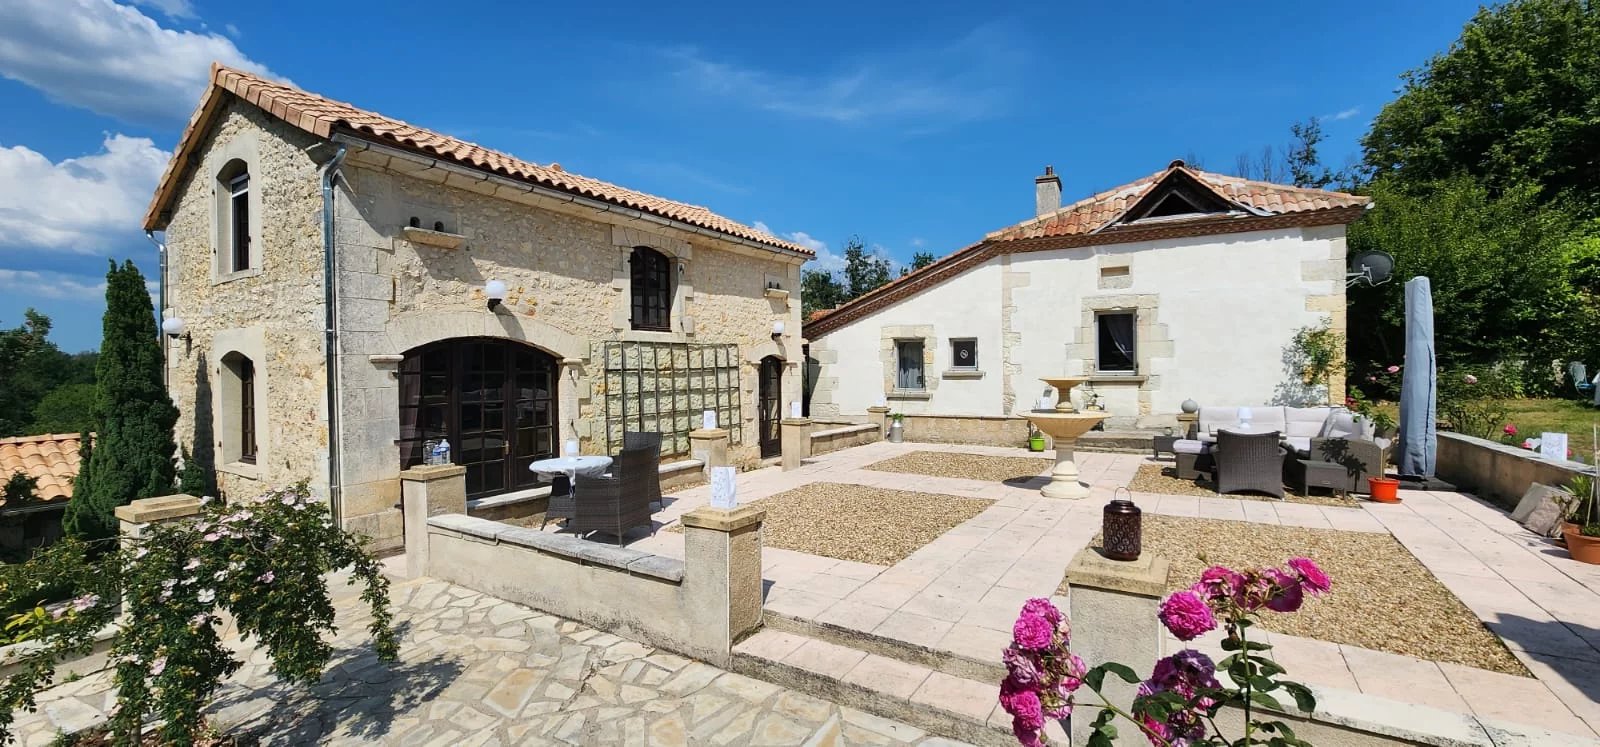 Idyllic Family home with separate guesthouse, pool, wood fired hot tub - set in perfectly landscaped private grounds of 2830m2